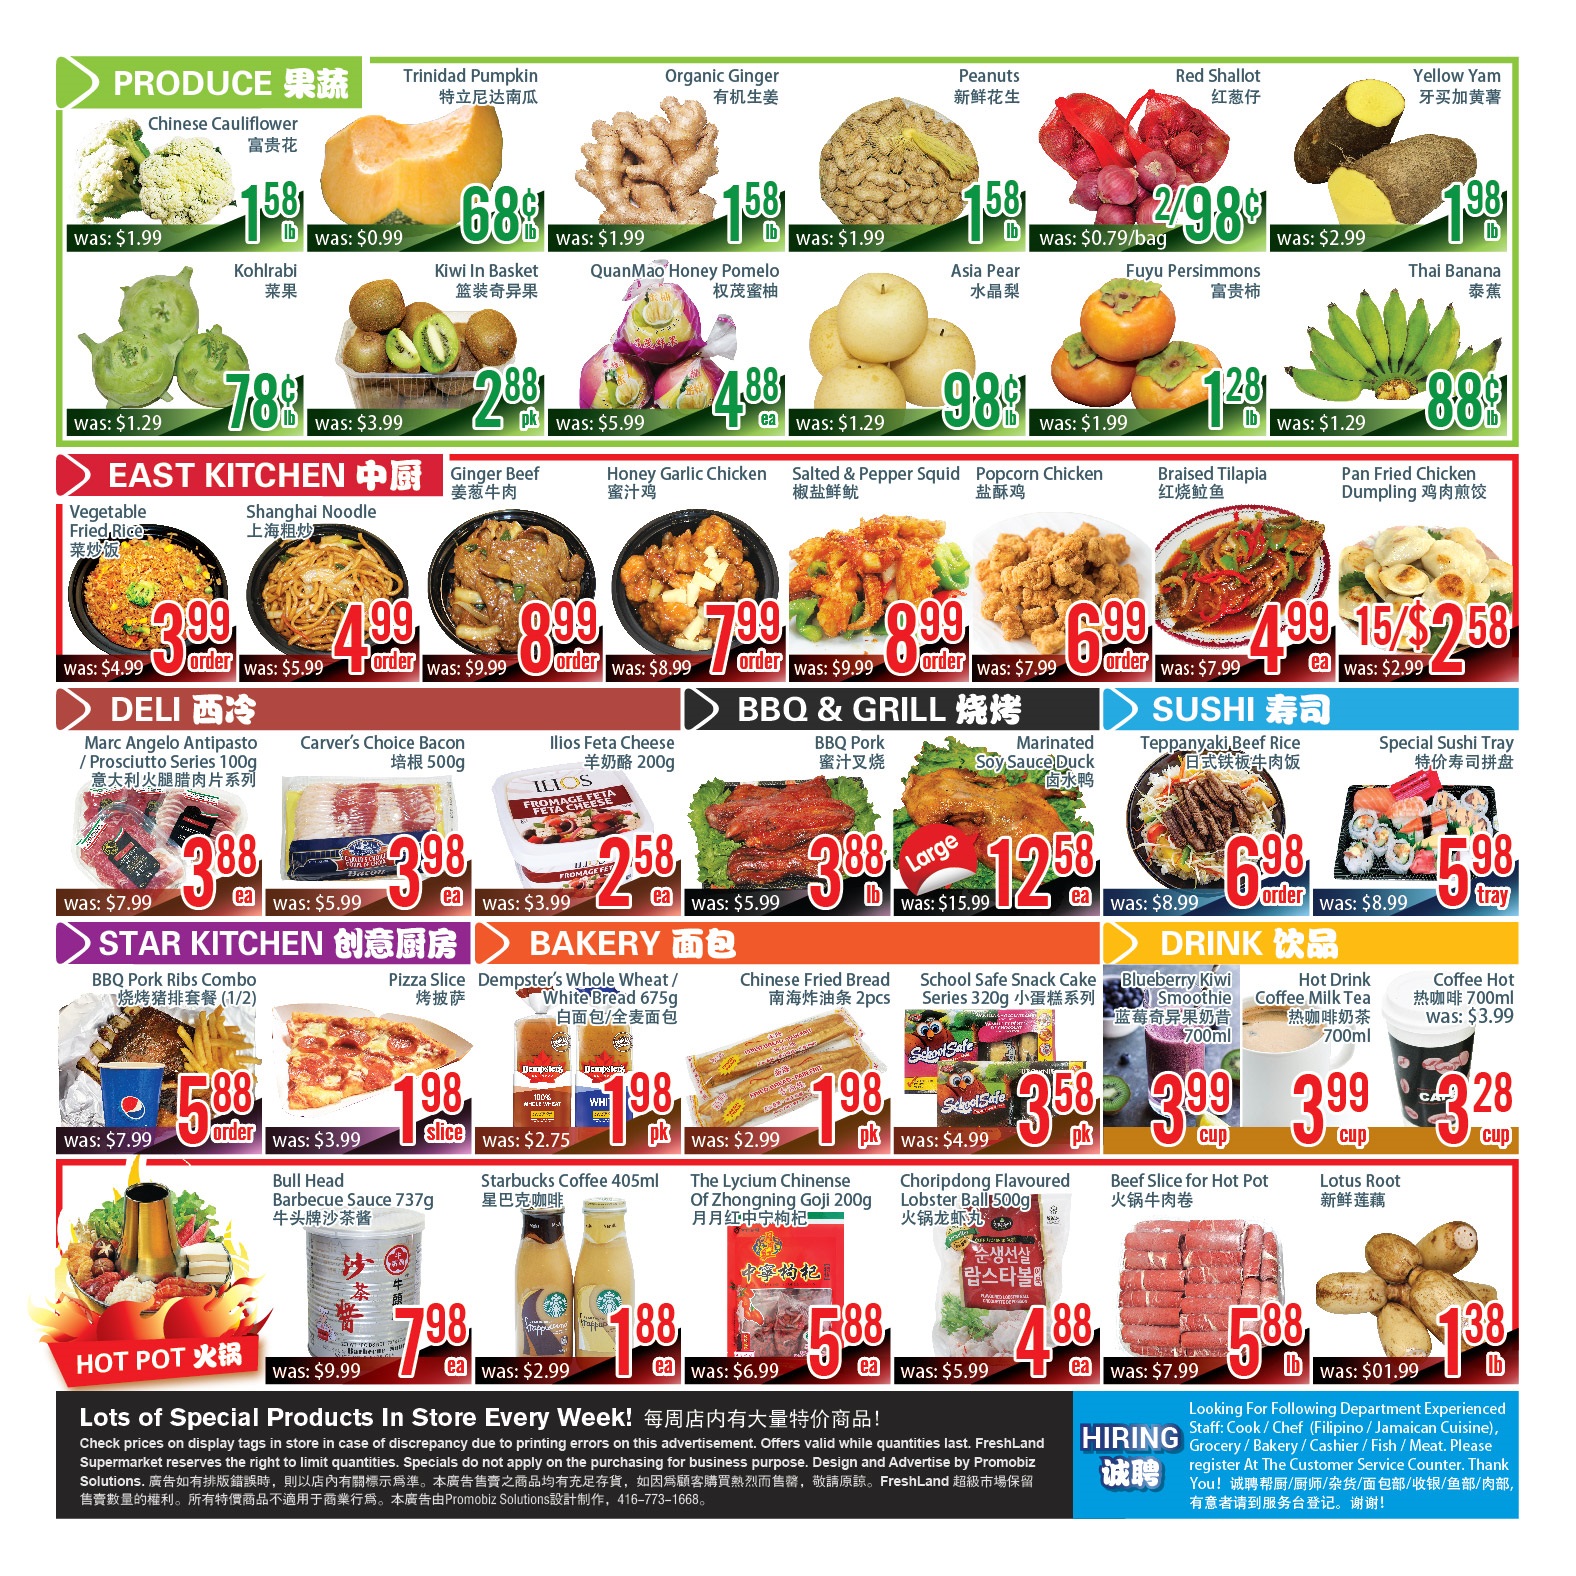 Freshland Special Products From Nov 15 To Nov 21